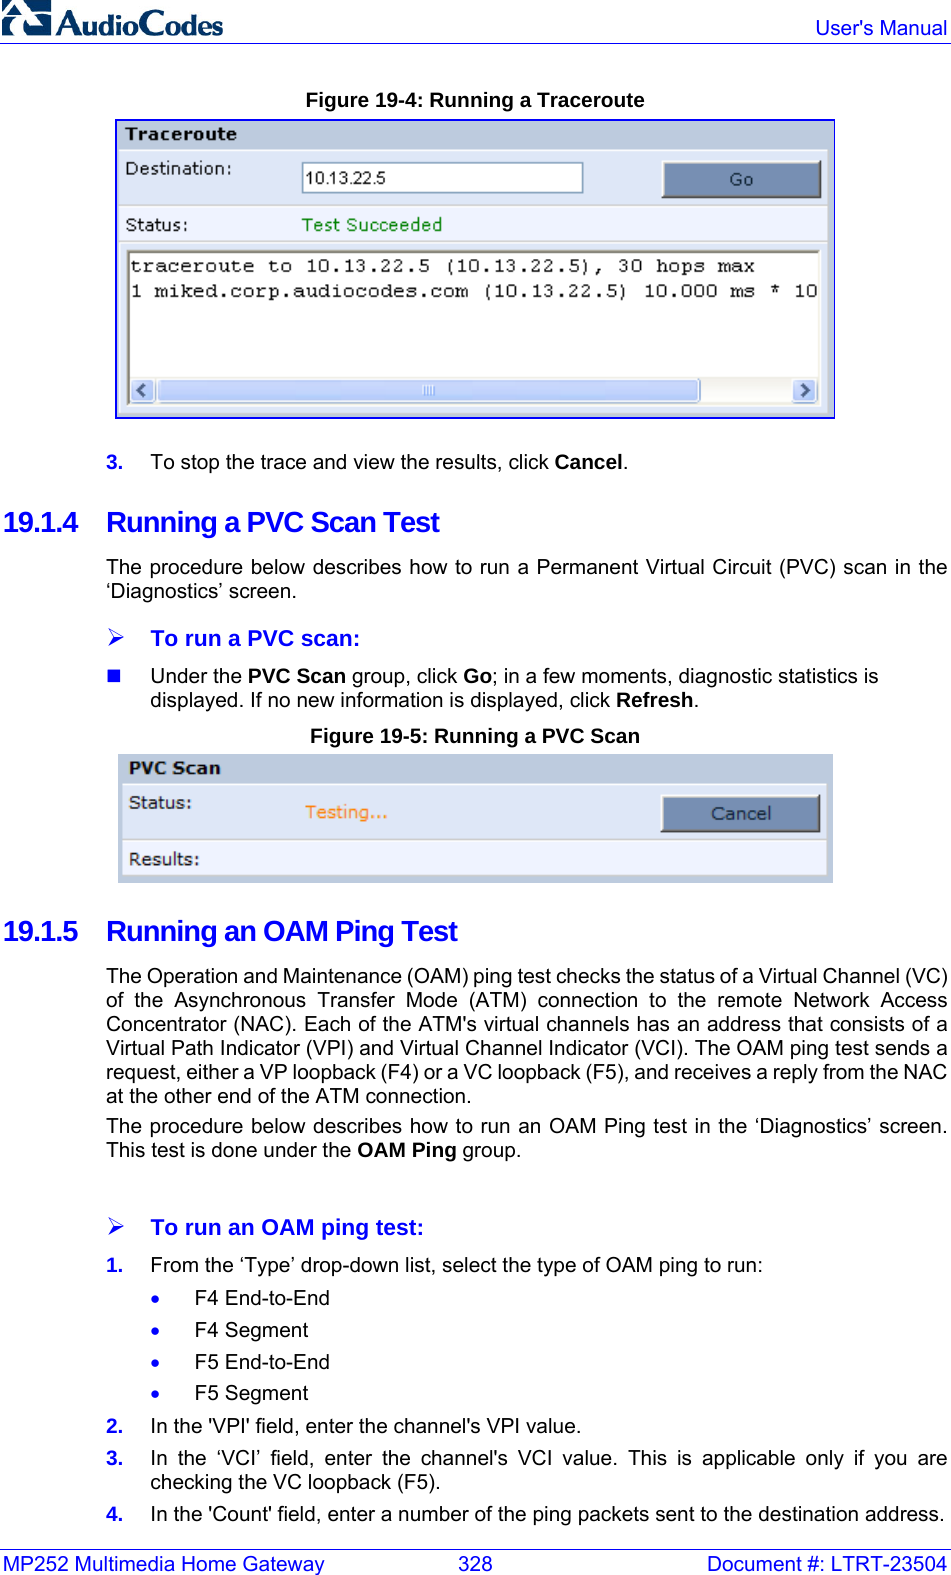 MP252 Multimedia Home Gateway  328  Document #: LTRT-23504  User&apos;s Manual  Figure 19-4: Running a Traceroute  3.  To stop the trace and view the results, click Cancel. 19.1.4  Running a PVC Scan Test The procedure below describes how to run a Permanent Virtual Circuit (PVC) scan in the ‘Diagnostics’ screen. ¾ To run a PVC scan:  Under the PVC Scan group, click Go; in a few moments, diagnostic statistics is displayed. If no new information is displayed, click Refresh. Figure 19-5: Running a PVC Scan  19.1.5  Running an OAM Ping Test The Operation and Maintenance (OAM) ping test checks the status of a Virtual Channel (VC) of the Asynchronous Transfer Mode (ATM) connection to the remote Network Access Concentrator (NAC). Each of the ATM&apos;s virtual channels has an address that consists of a Virtual Path Indicator (VPI) and Virtual Channel Indicator (VCI). The OAM ping test sends a request, either a VP loopback (F4) or a VC loopback (F5), and receives a reply from the NAC at the other end of the ATM connection. The procedure below describes how to run an OAM Ping test in the ‘Diagnostics’ screen. This test is done under the OAM Ping group.  ¾ To run an OAM ping test: 1.  From the ‘Type’ drop-down list, select the type of OAM ping to run: • F4 End-to-End • F4 Segment • F5 End-to-End • F5 Segment 2.  In the &apos;VPI&apos; field, enter the channel&apos;s VPI value. 3.  In the ‘VCI’ field, enter the channel&apos;s VCI value. This is applicable only if you are checking the VC loopback (F5).  4.  In the &apos;Count&apos; field, enter a number of the ping packets sent to the destination address. 